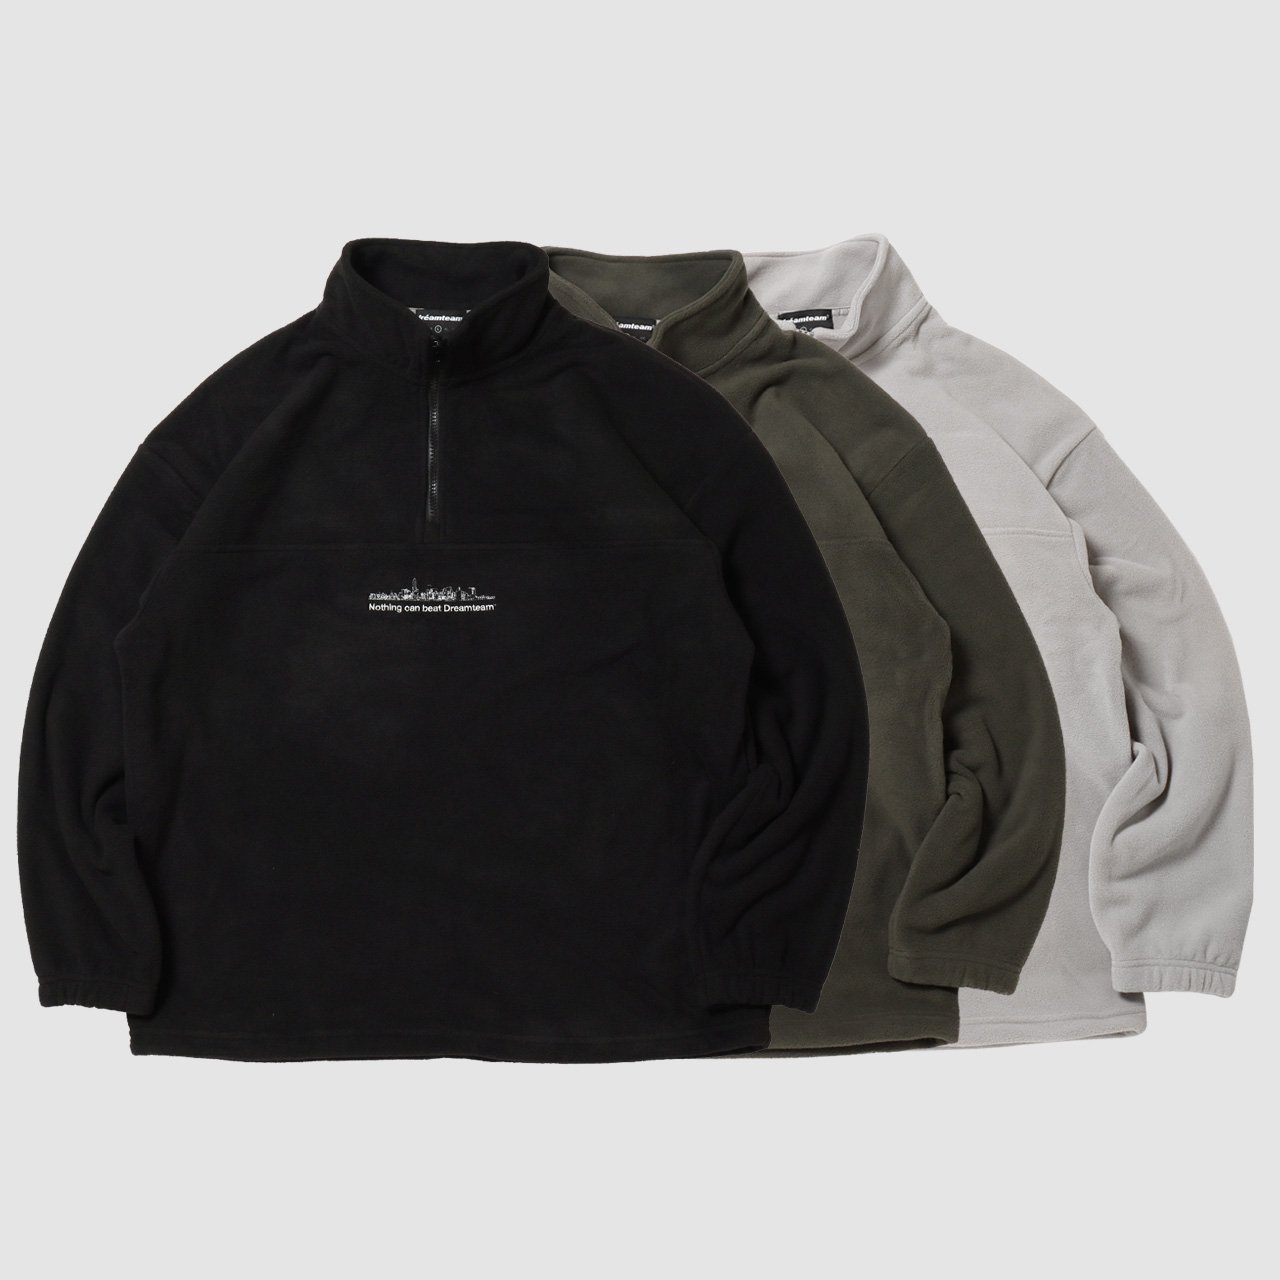 <img class='new_mark_img1' src='https://img.shop-pro.jp/img/new/icons35.gif' style='border:none;display:inline;margin:0px;padding:0px;width:auto;' />Nothing can beat DT Half Zip Fleece